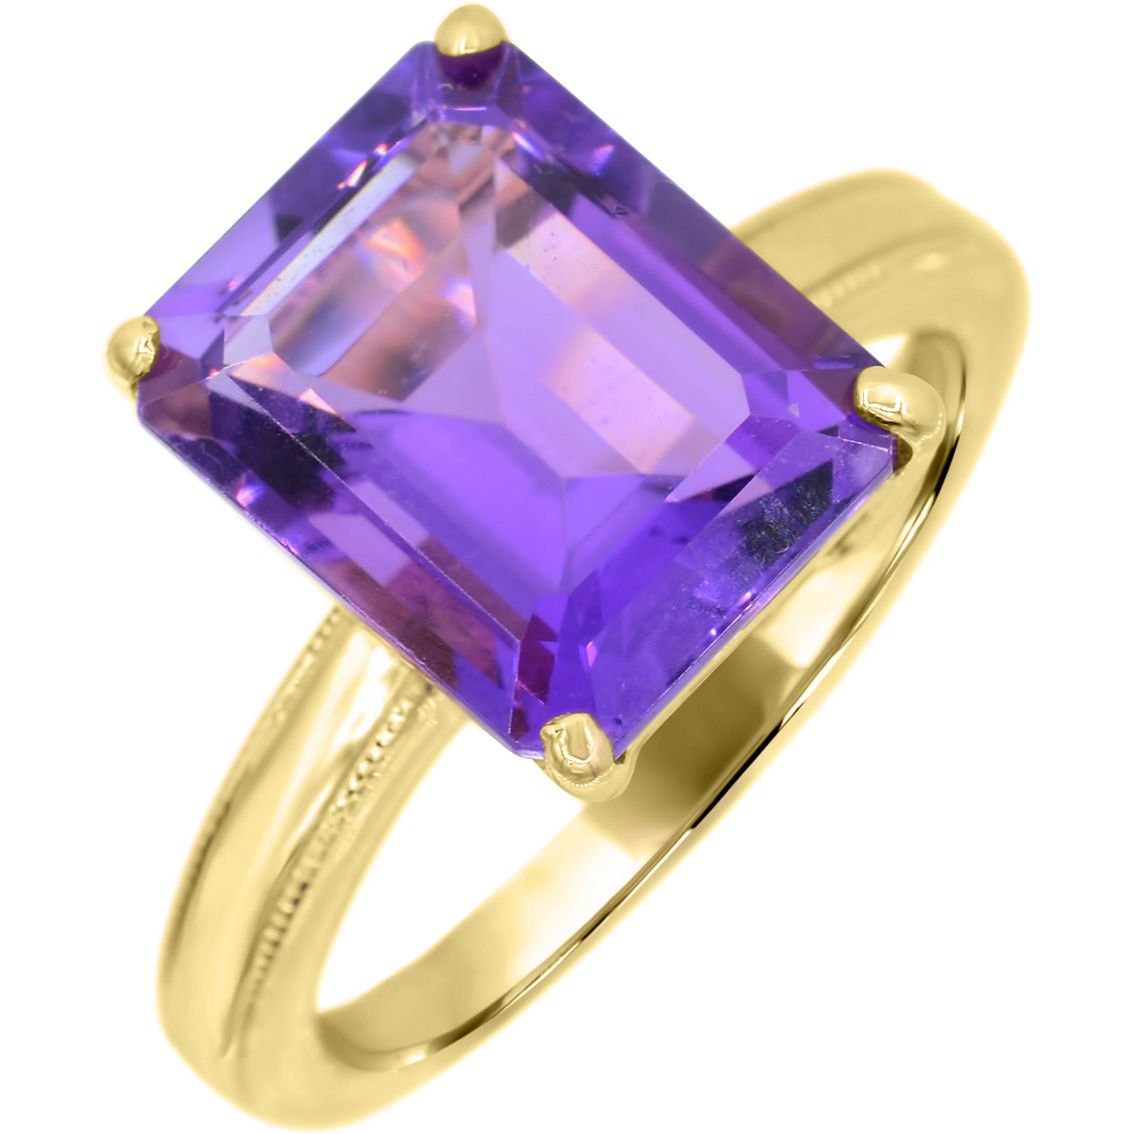 10K Yellow Gold Emerald Cut Amethyst Solitaire Ring Size 7 - Image 3 of 3